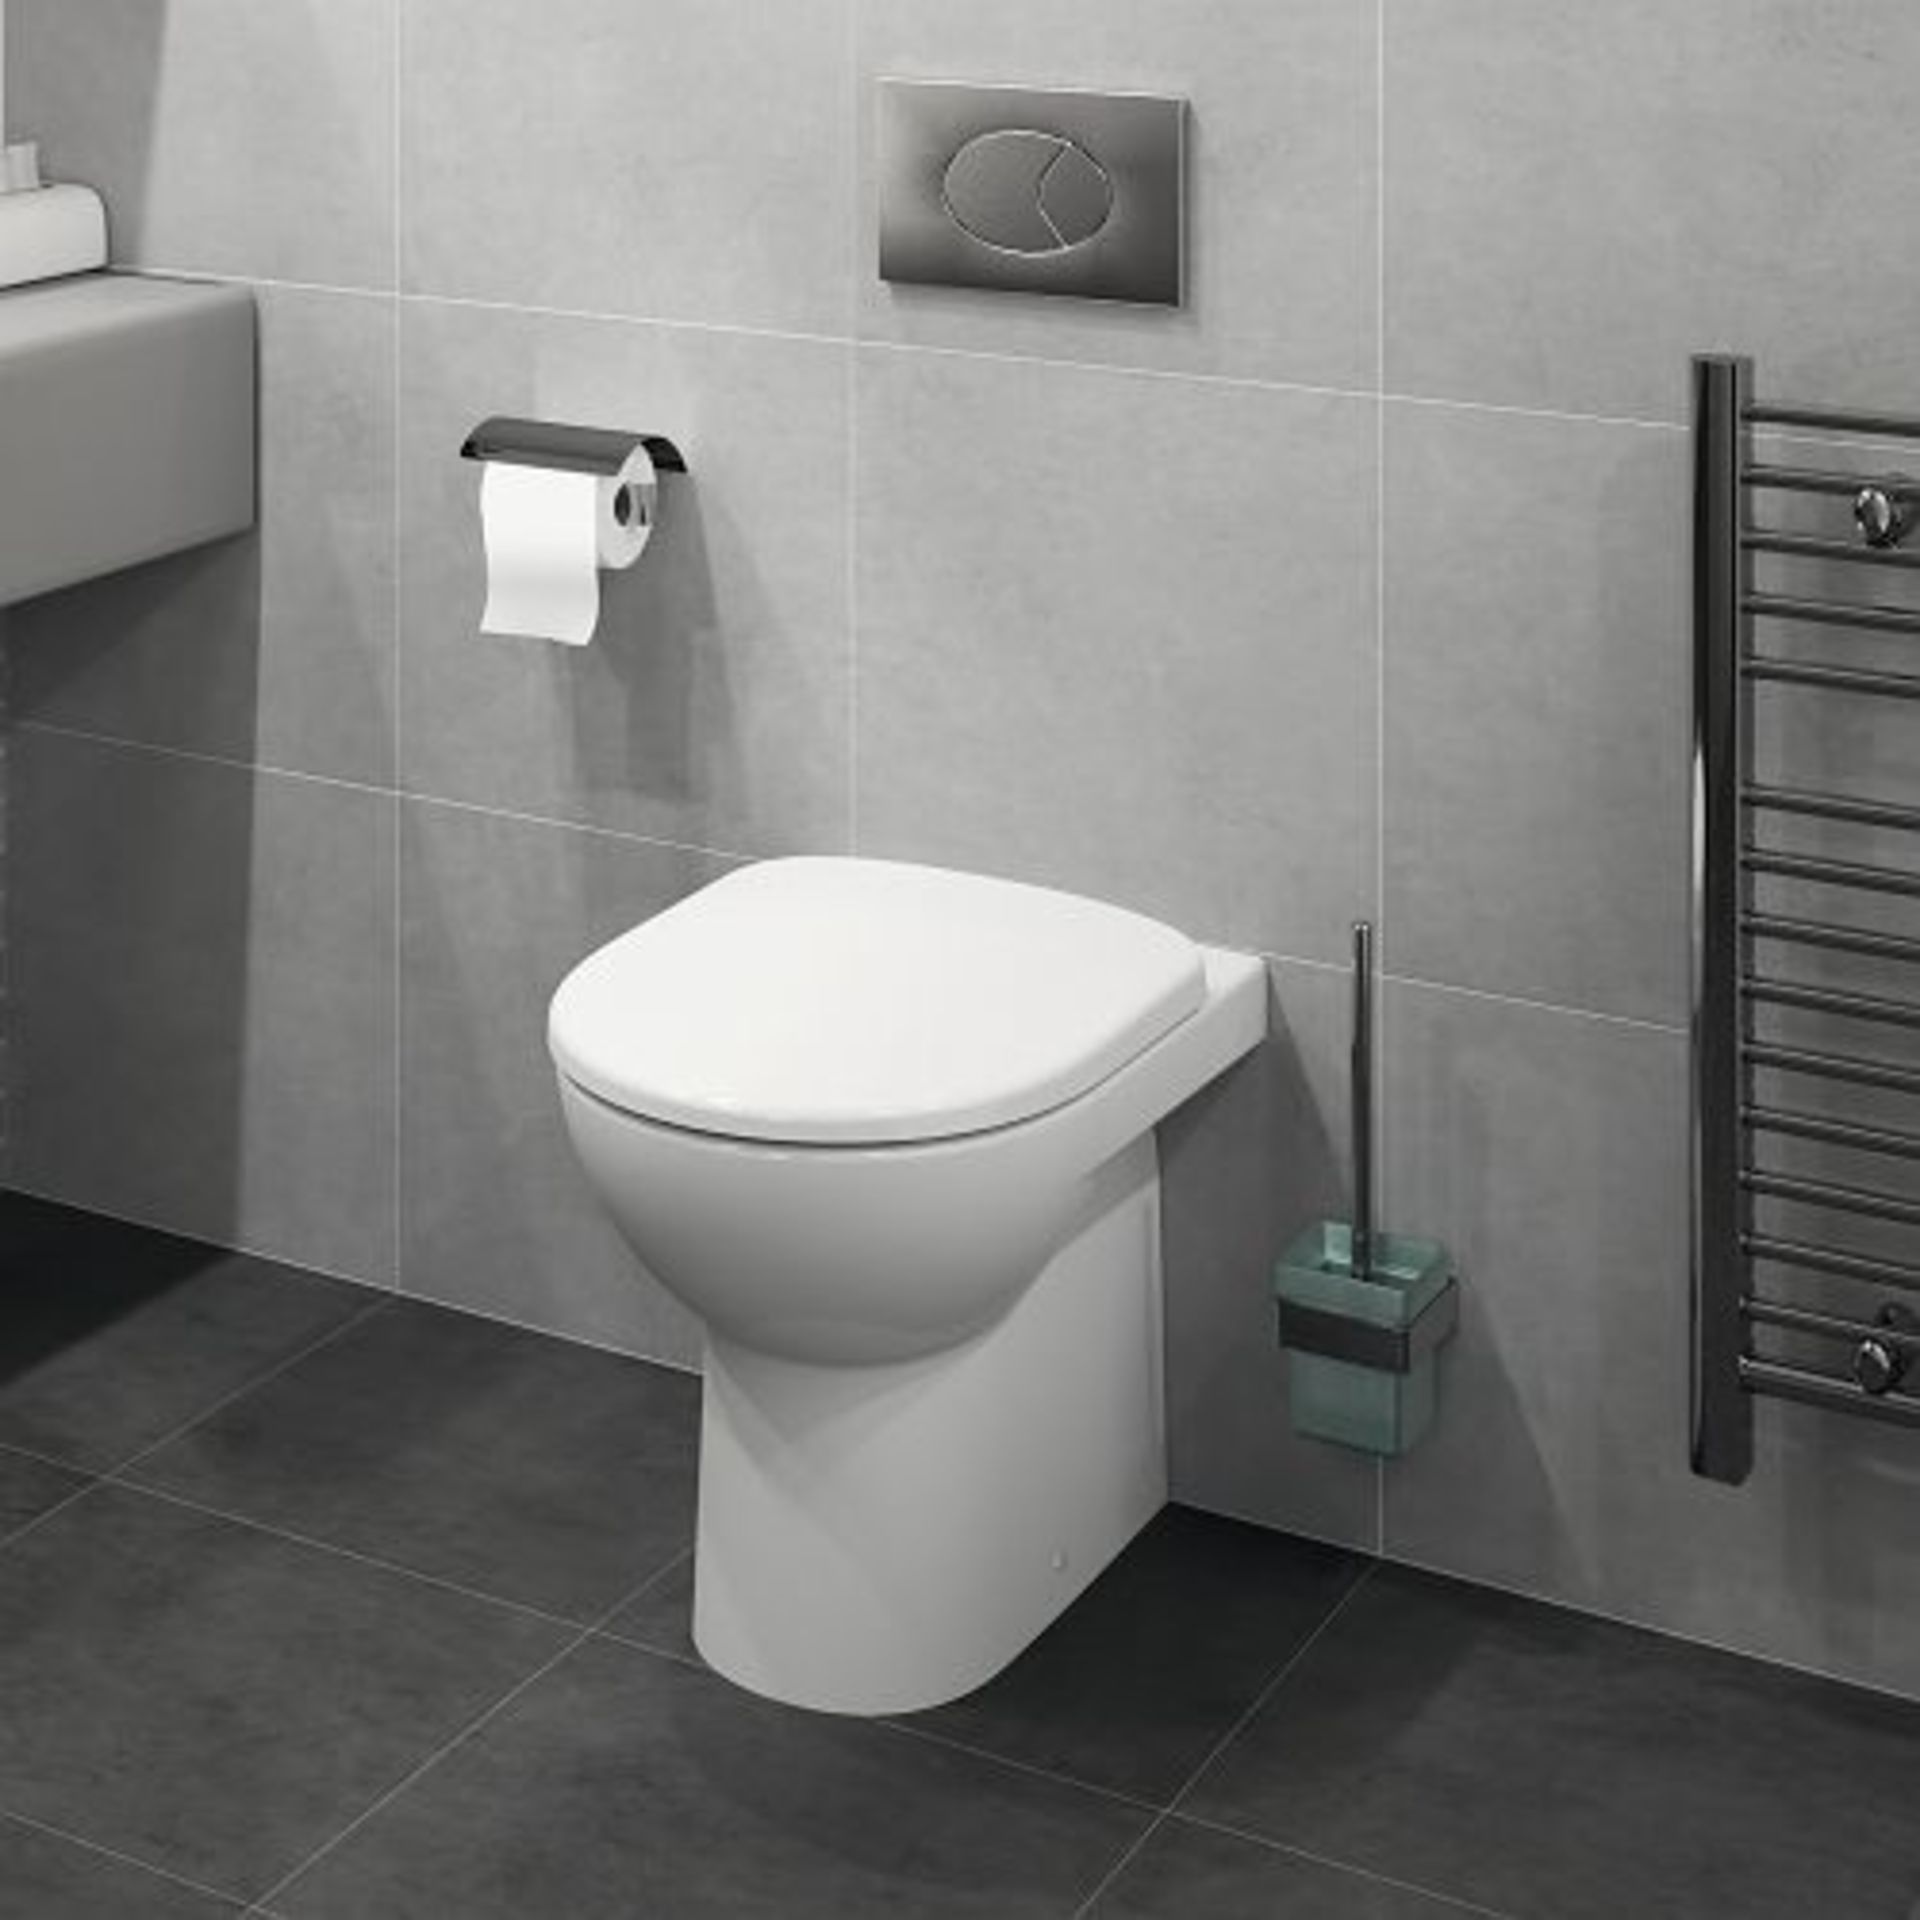 Twyford E500 Round Back to Wall Toilet RRP £200 - Image 5 of 6